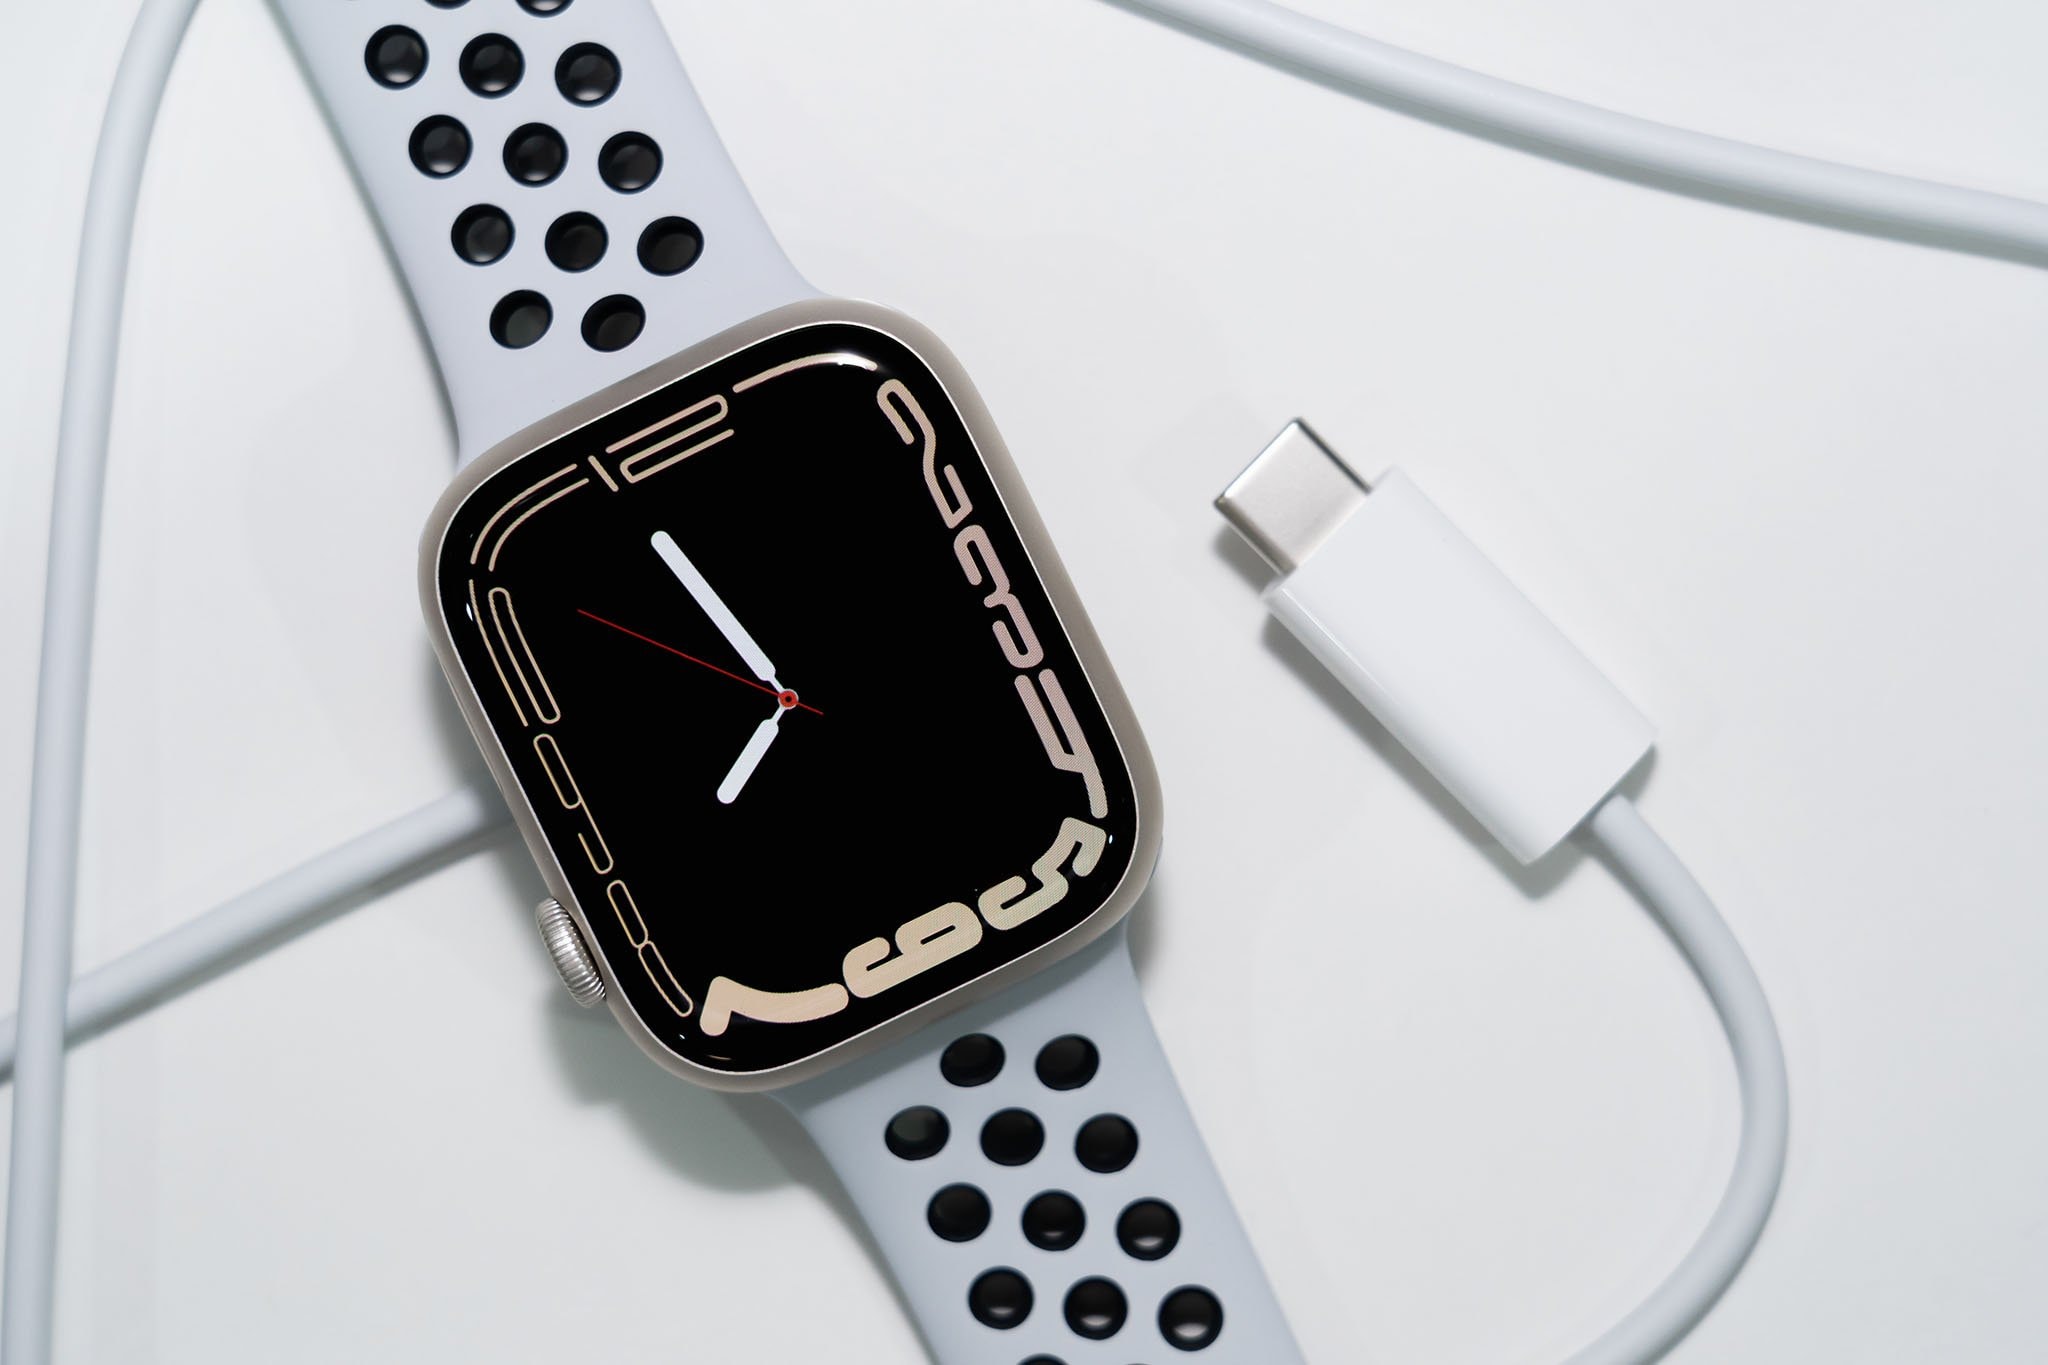 Described as the ultimate device for a healthy life, Apple Watch allows you to wear your smartphone on your wrist and express your personal style by changing the straps